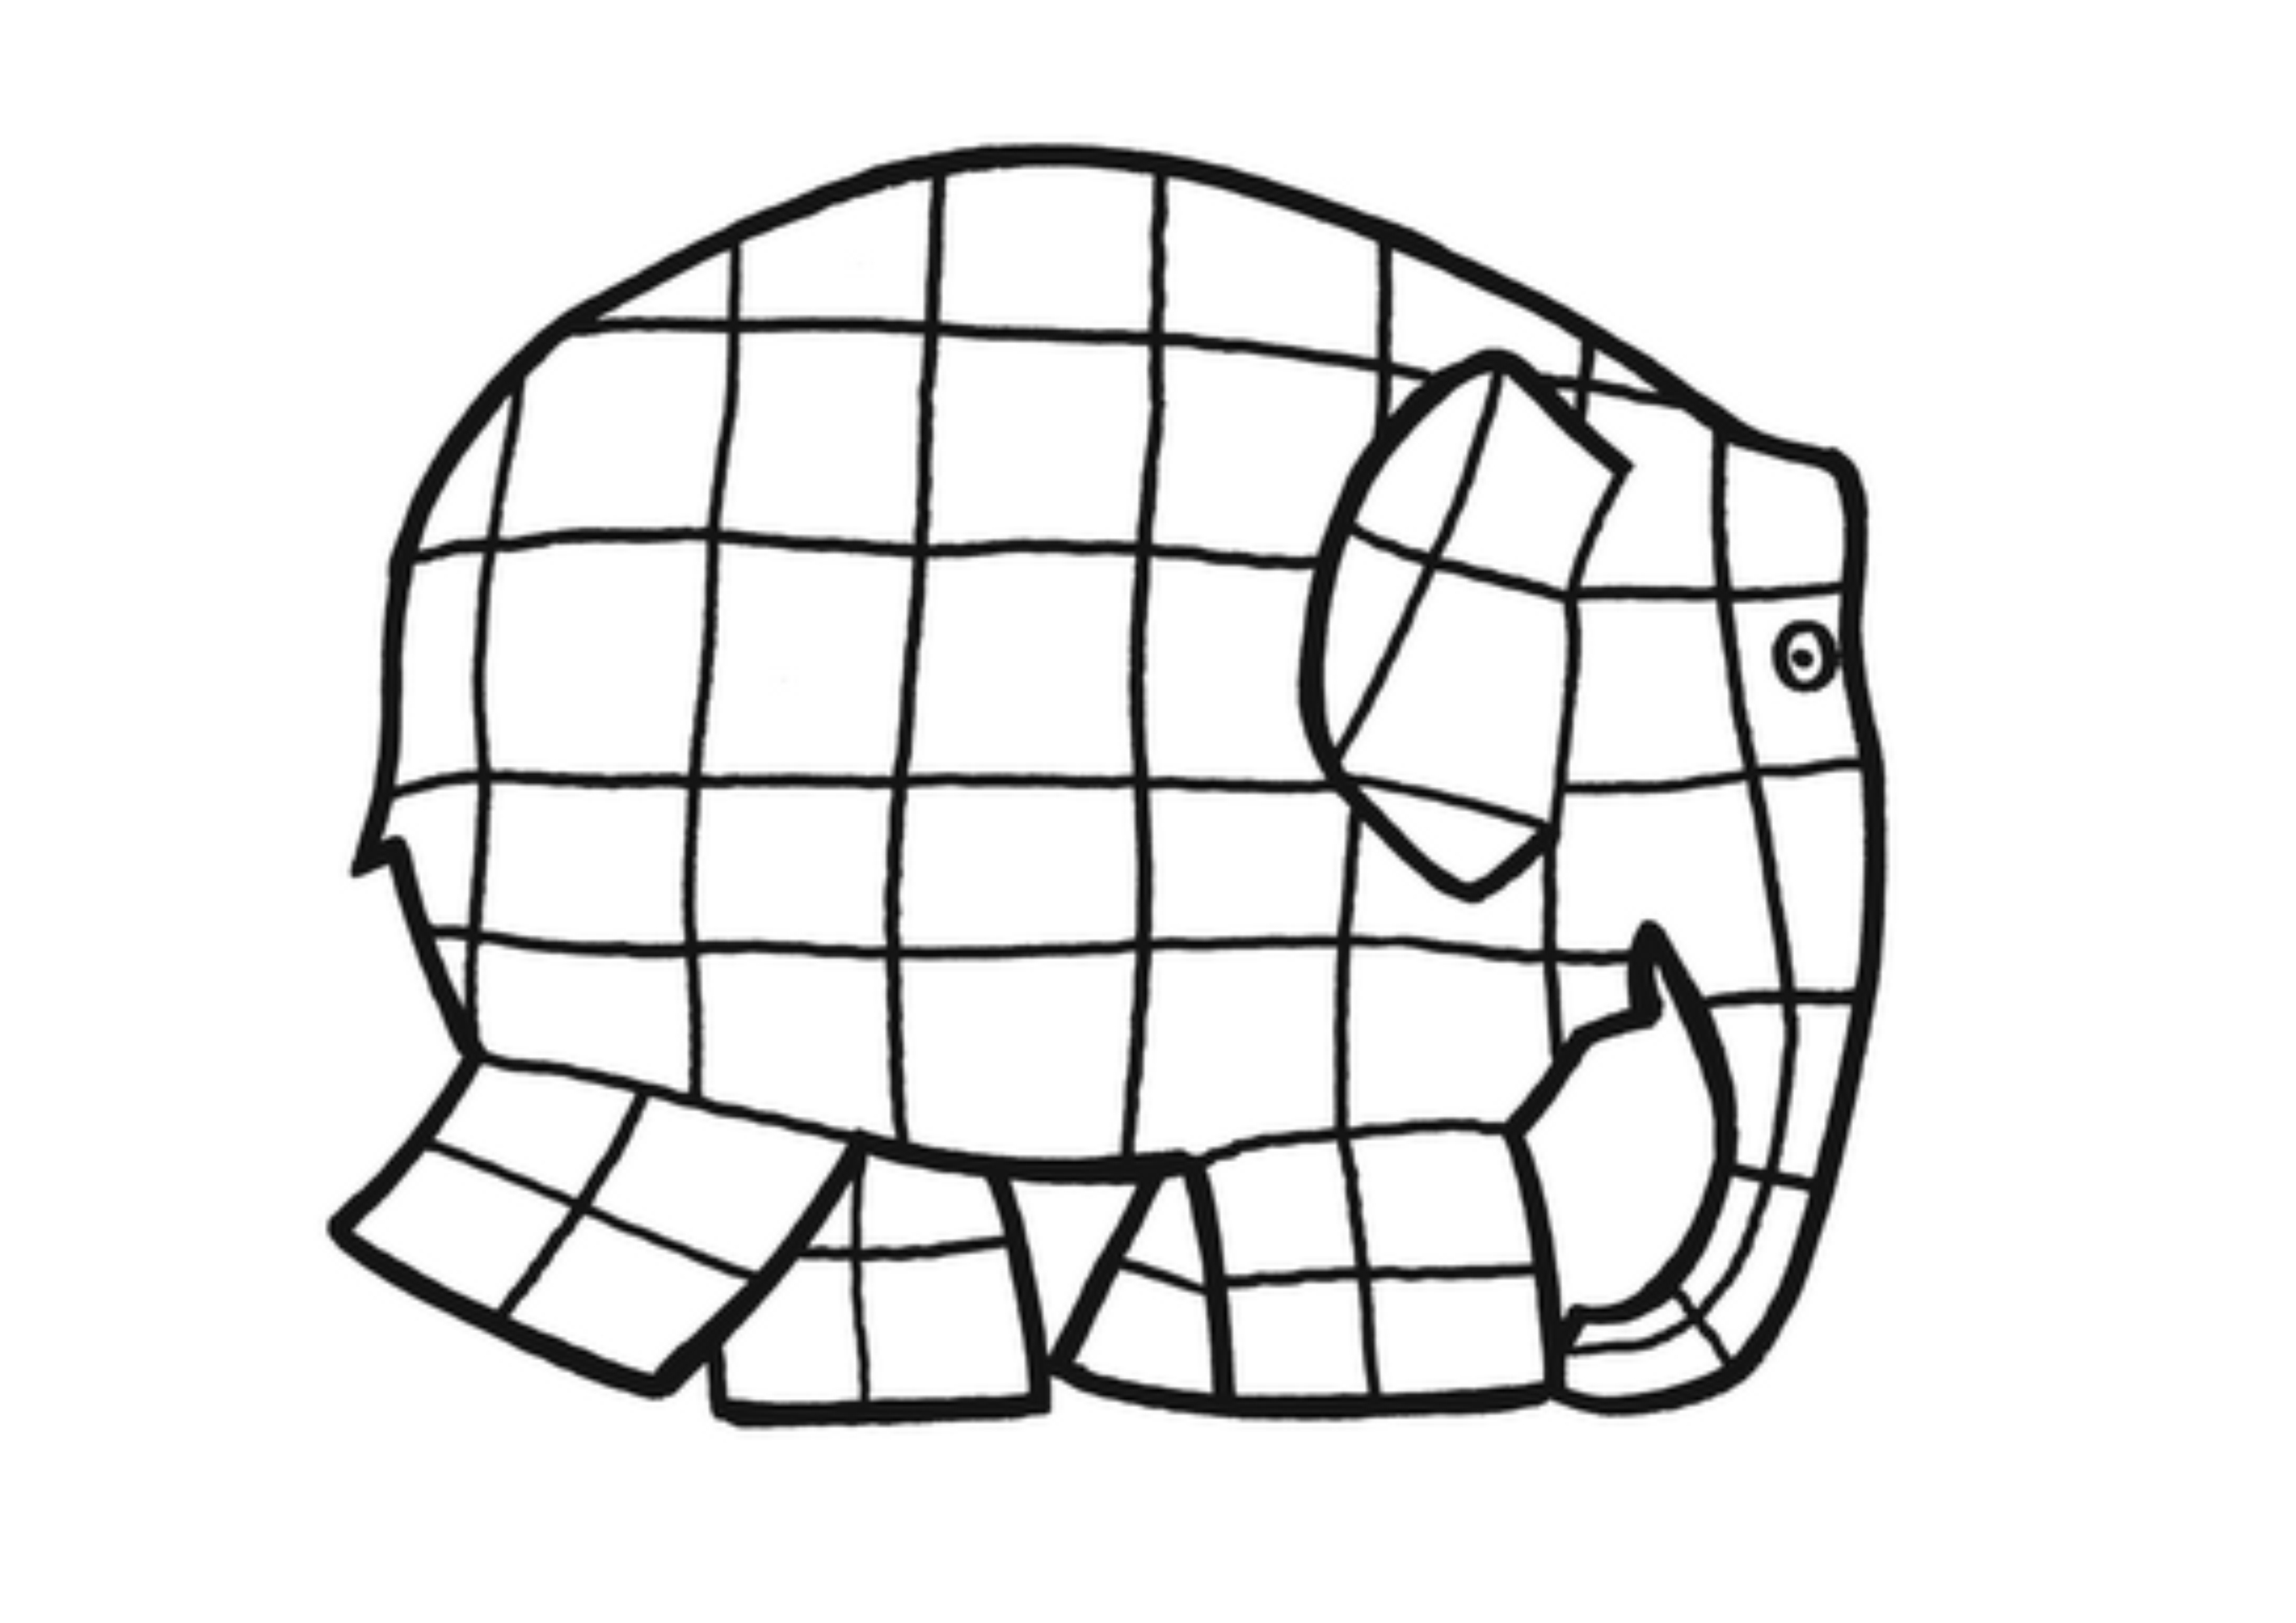 drawings-elephant-animals-page-4-printable-coloring-pages